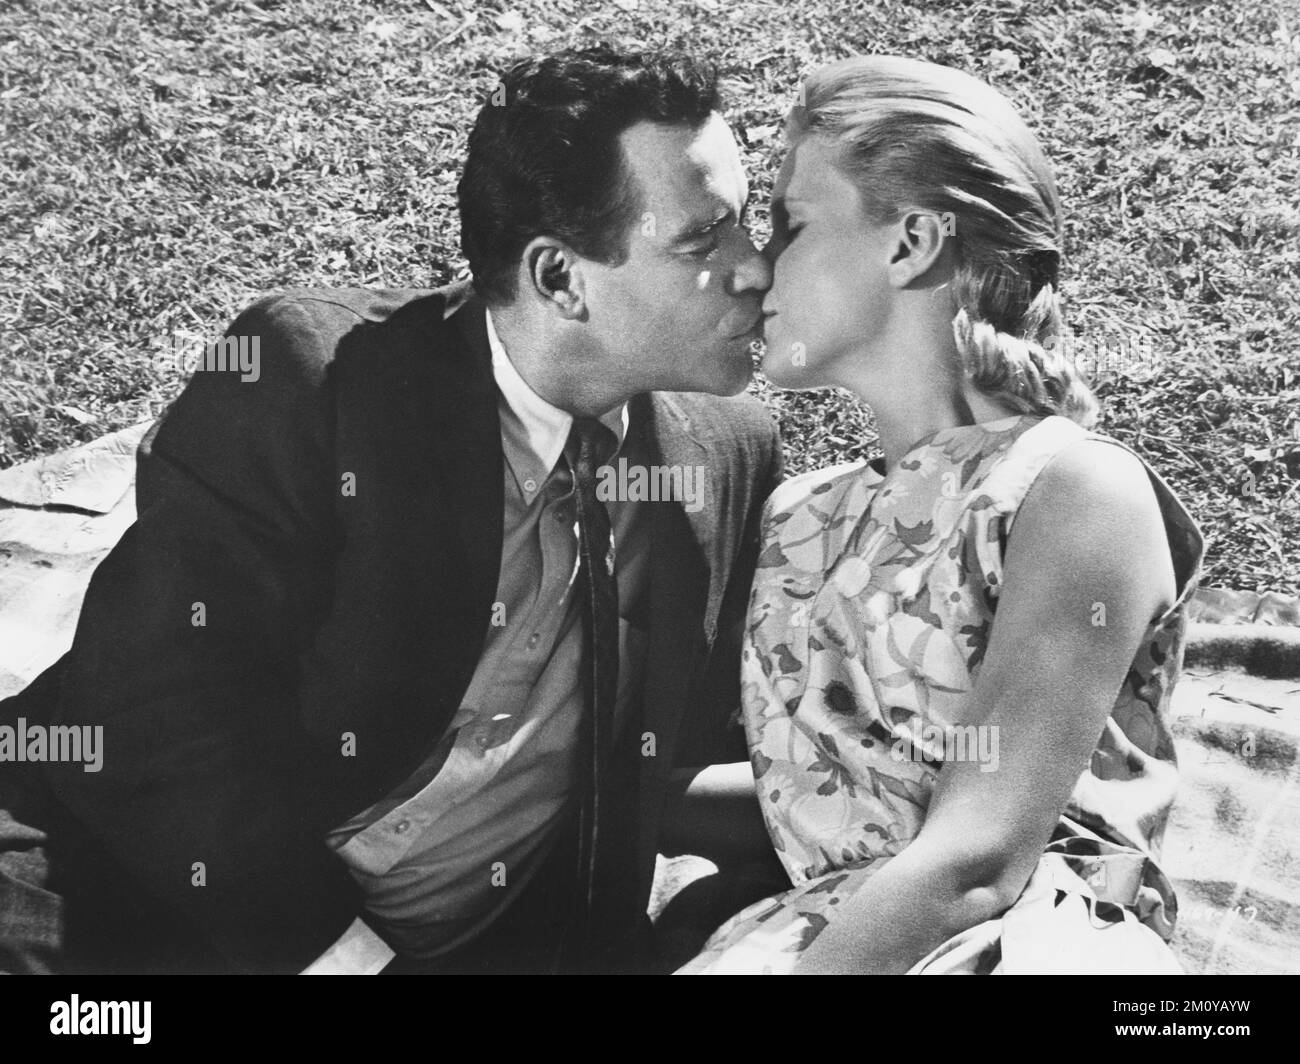 Jack Lemmon, Lee Remick, on-set of the Film, 'Days Of Wine And Roses', Warner Bros., 1962 Stock Photo